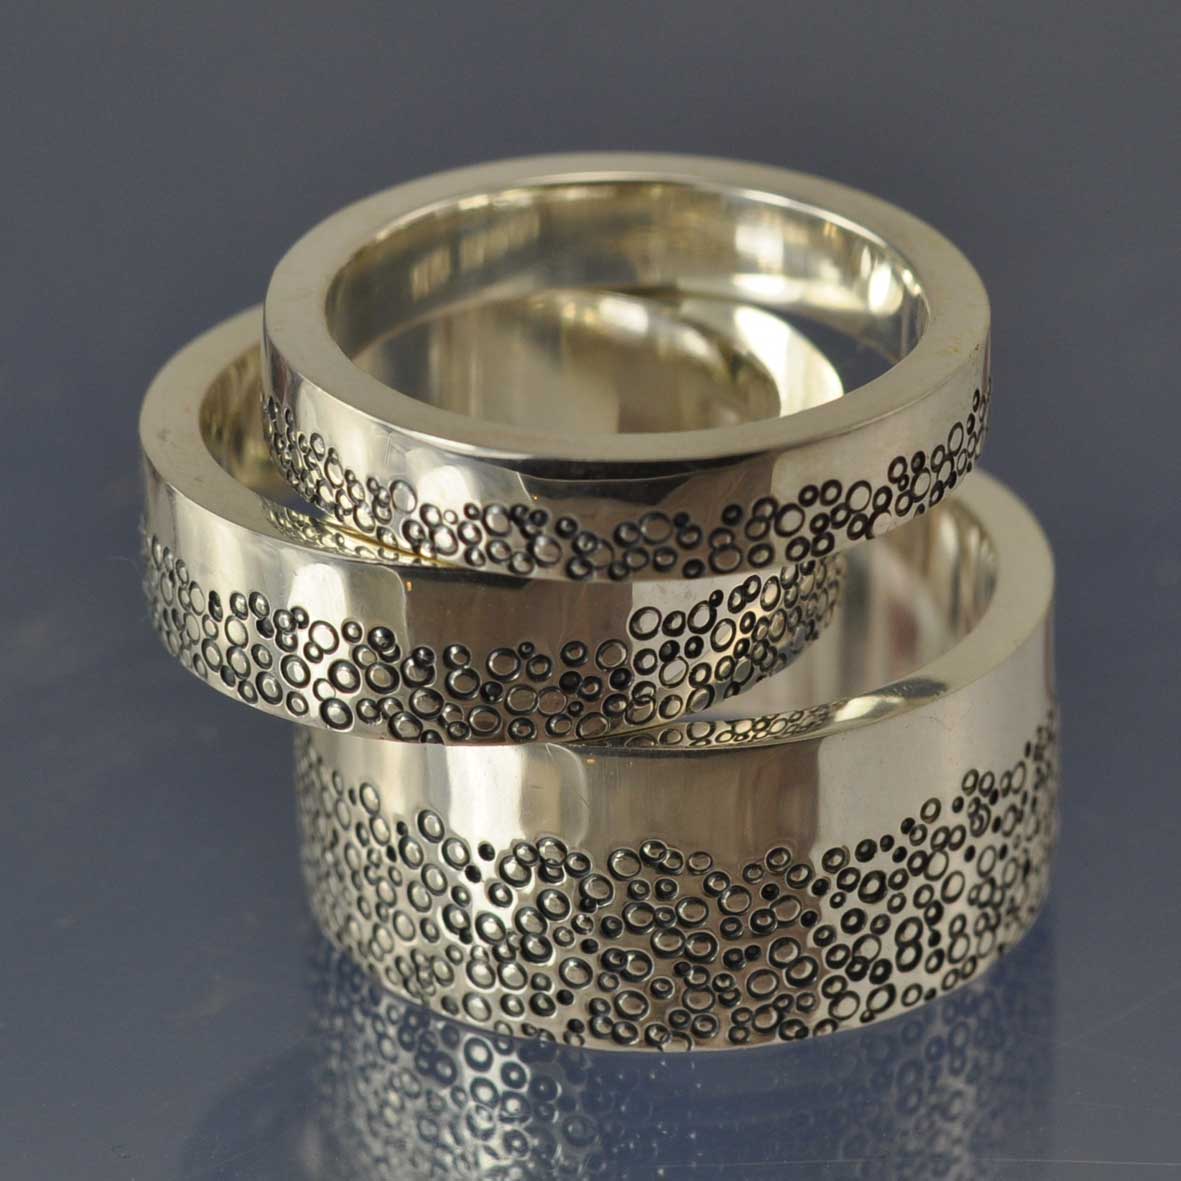 Cremation Ashes Memorial Ring - Effervescent Bubbles Ring by Chris Parry Jewellery